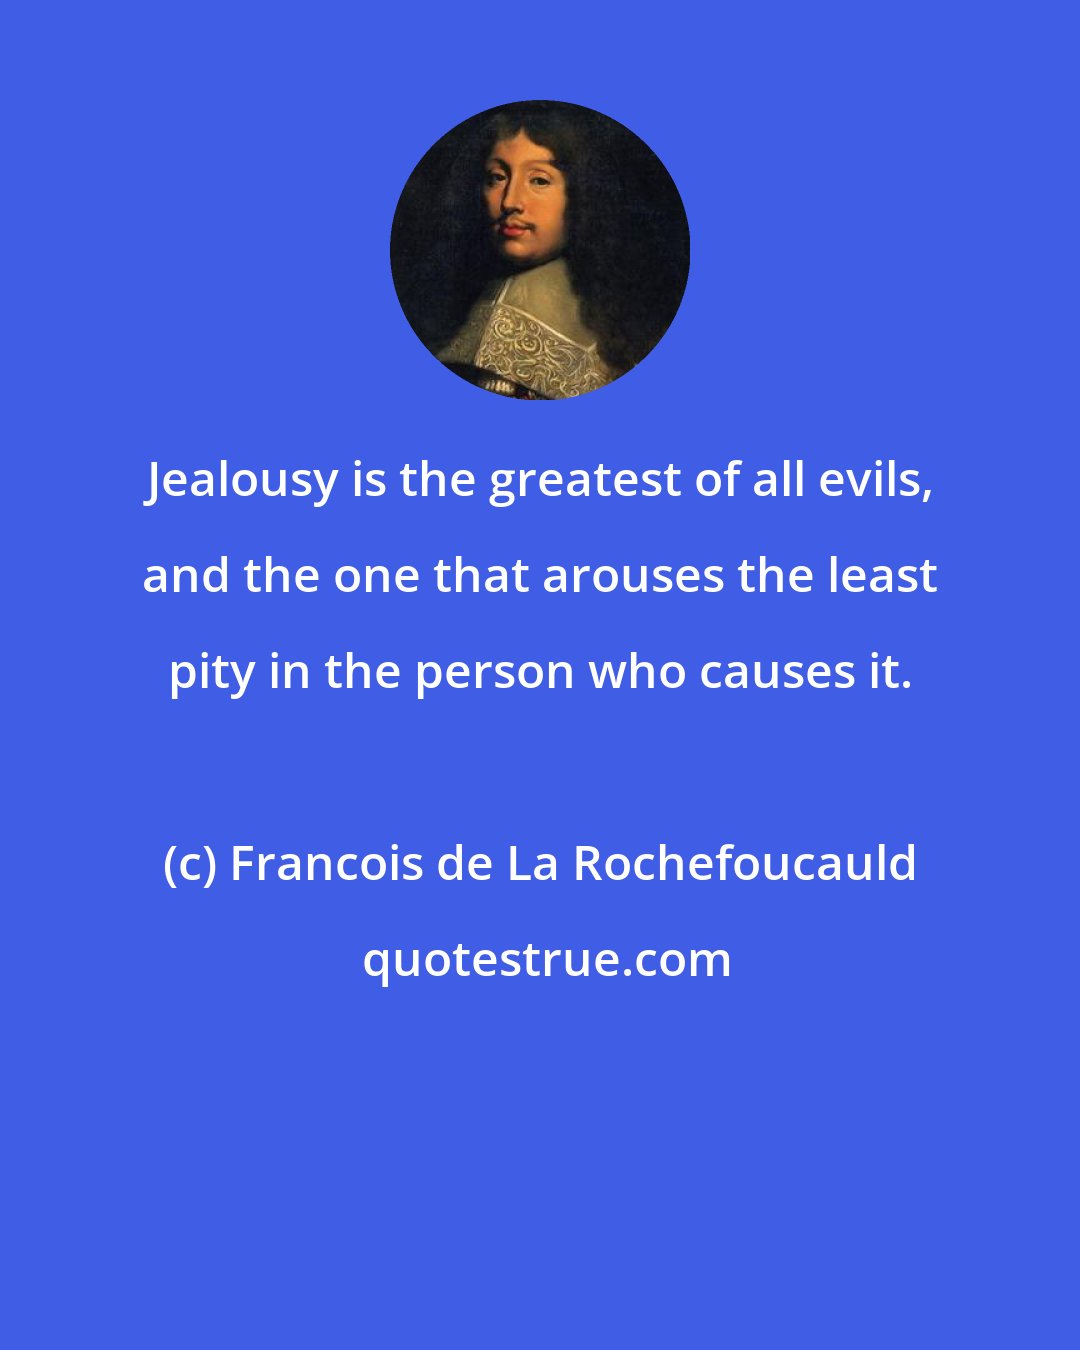 Francois de La Rochefoucauld: Jealousy is the greatest of all evils, and the one that arouses the least pity in the person who causes it.